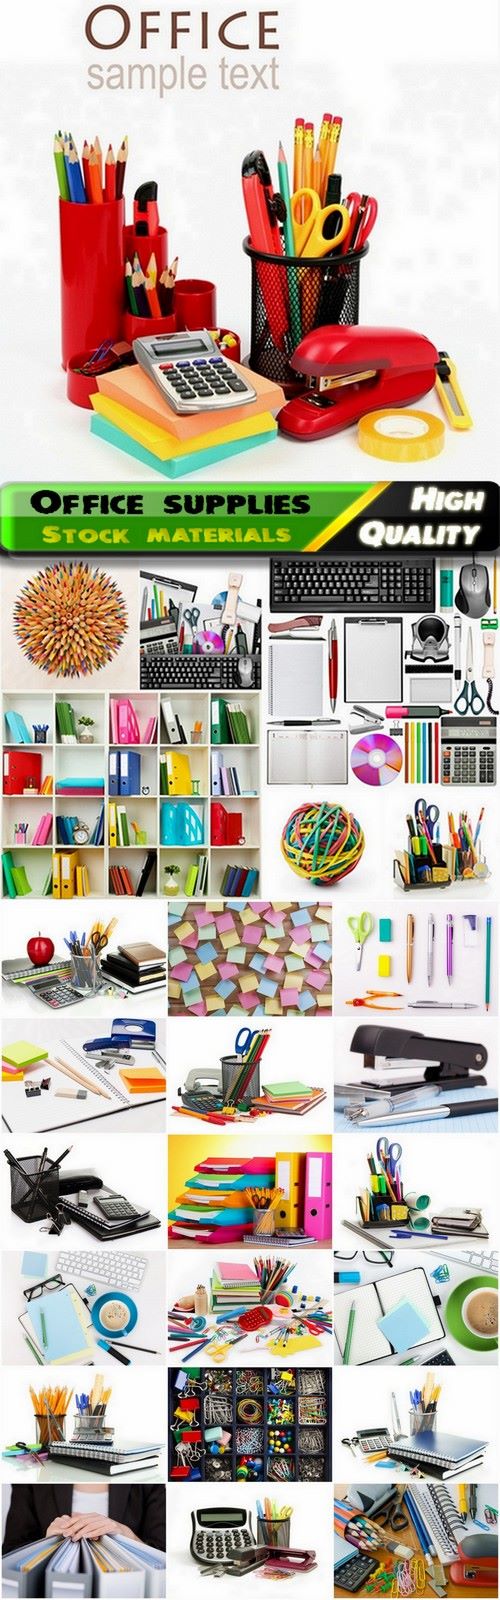 Office supplies and stationery Stock images - 25 HQ Jpg